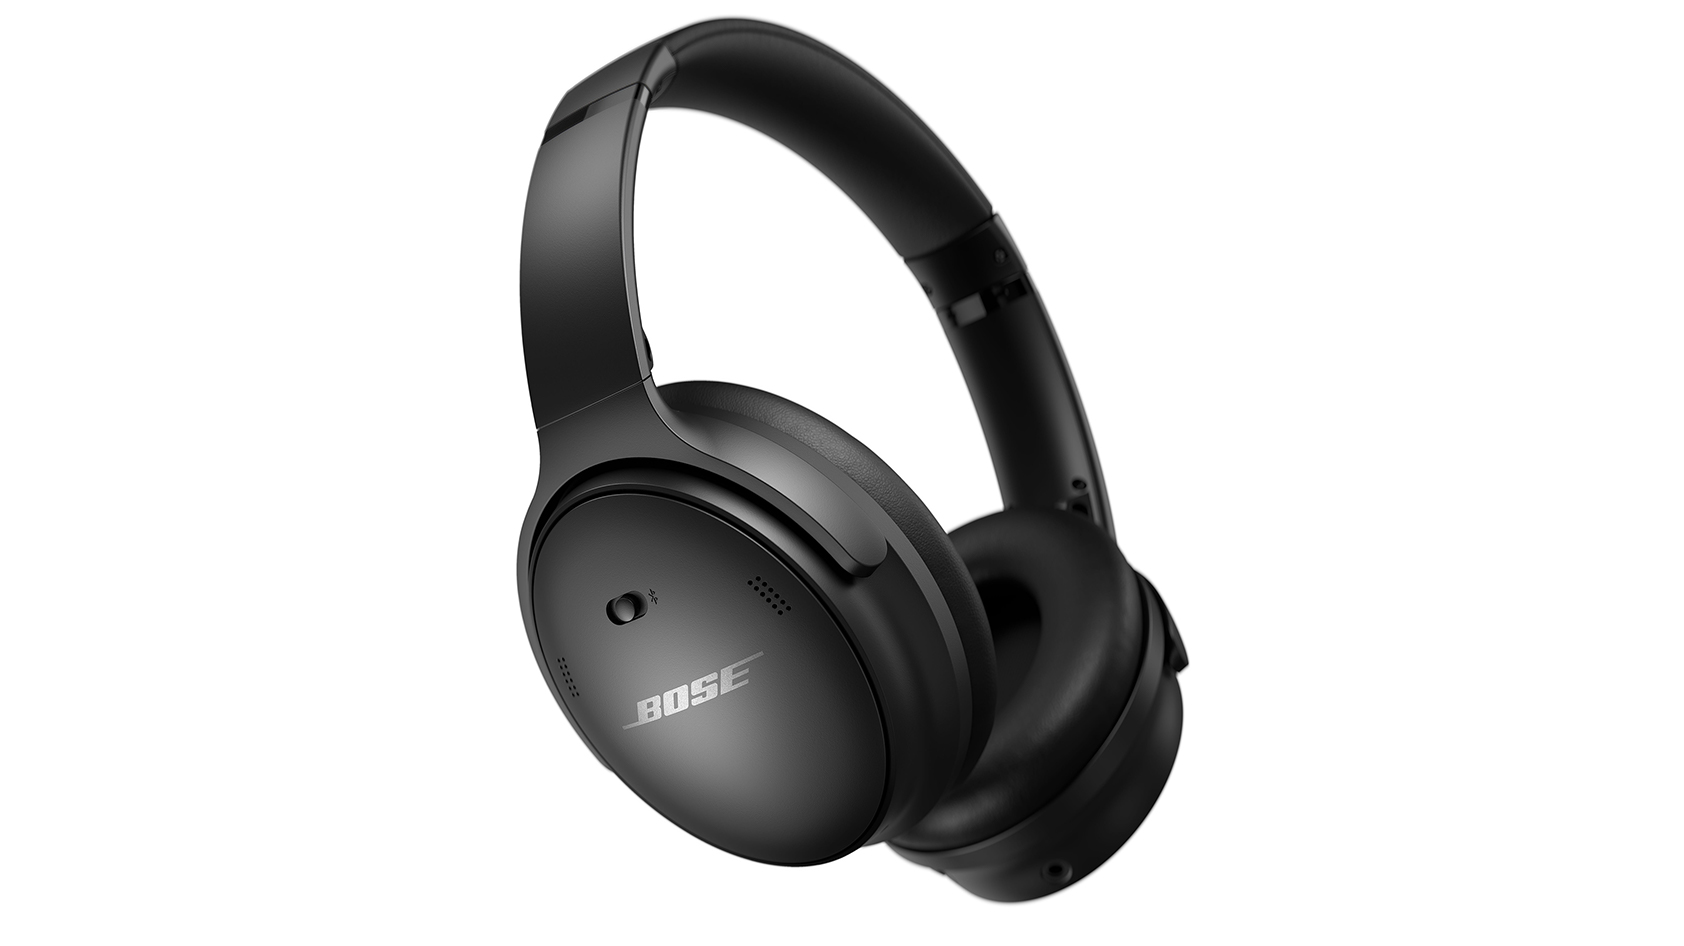 The Bose QuietComfort 45 in black against a white background.